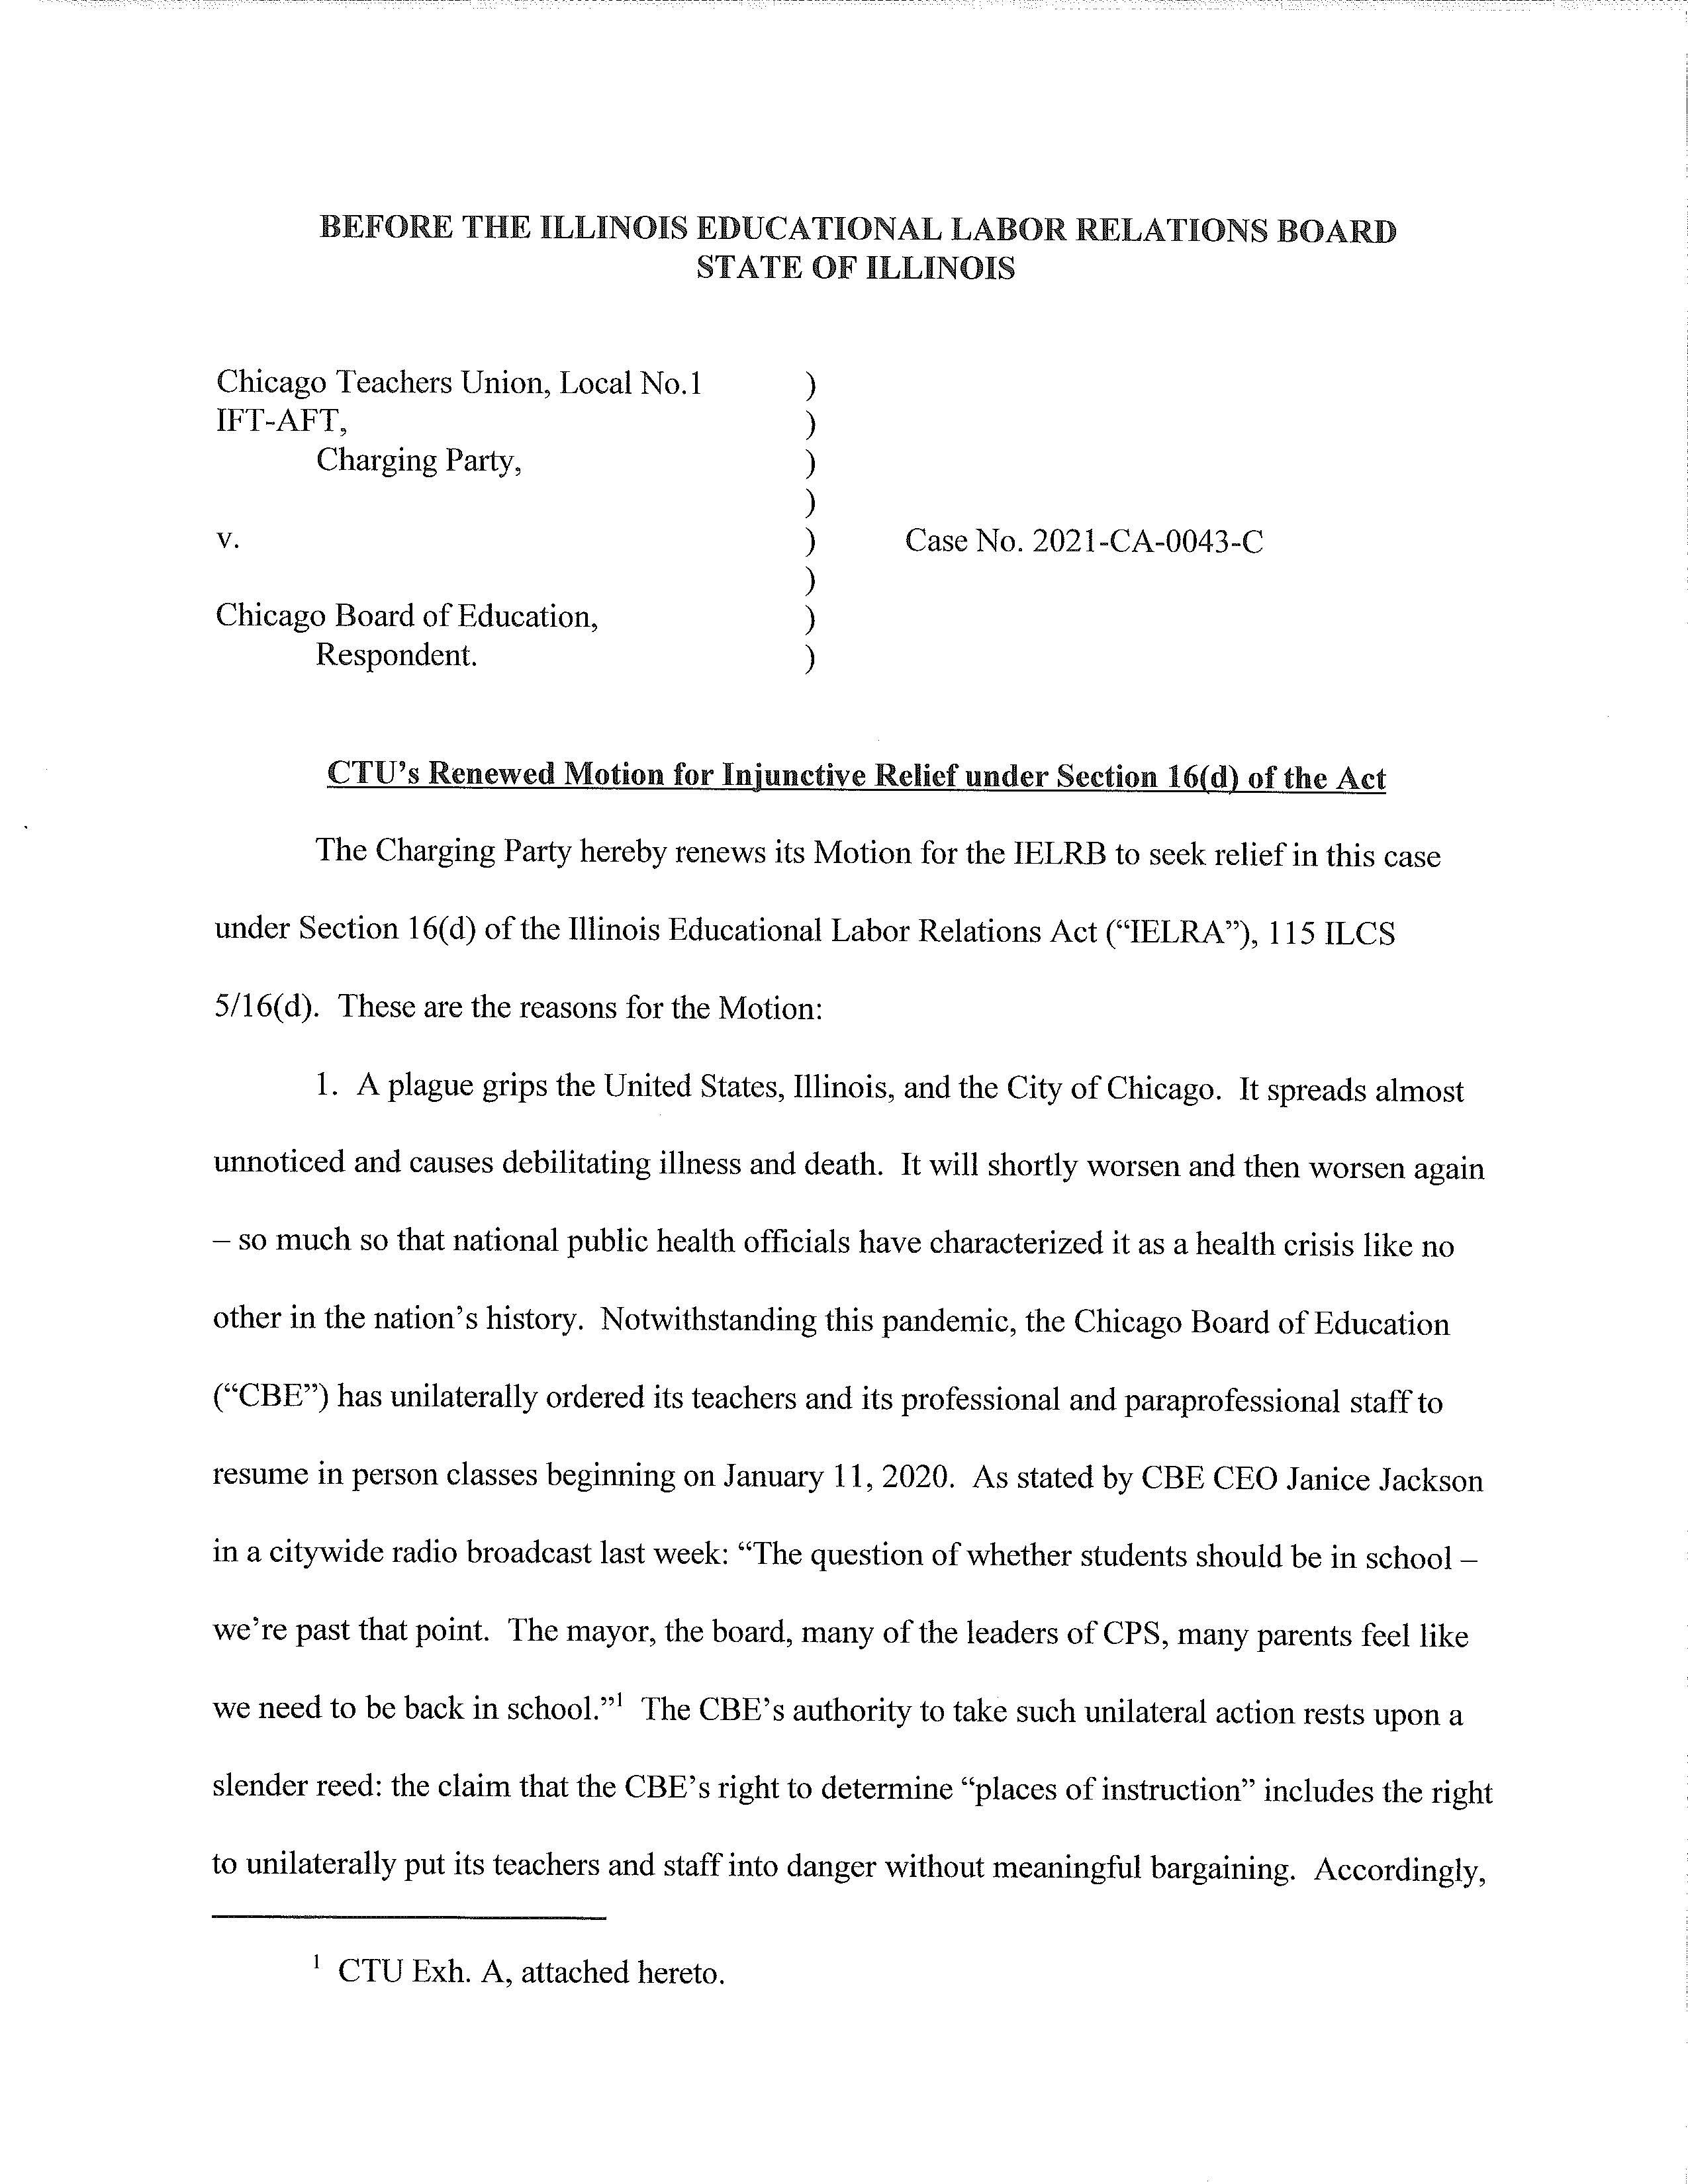 The Chicago Teachers Union filed a request 12/7/2020 with the Illinois Educational Labor Relations Board (IELRB) for an injunction against the Chicago Public Schools for arbitrarily setting a reopening date and manipulating statistics to justify their decision. 